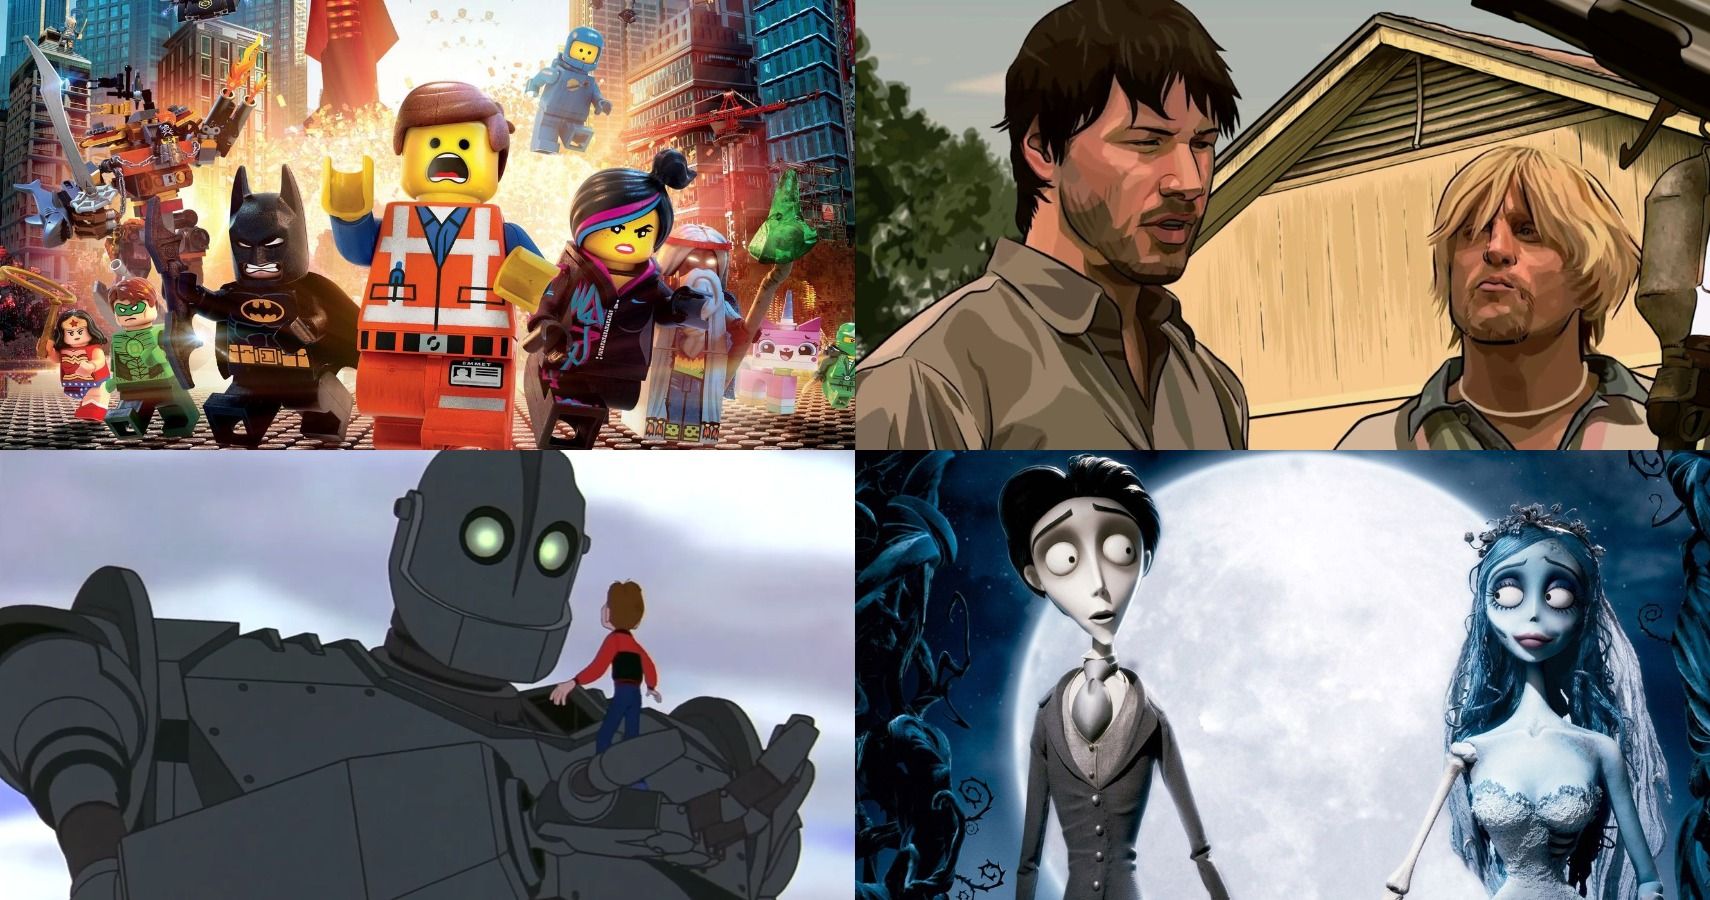 Warner Bros The 10 Best Animated Films Of All Time (According To IMDb)